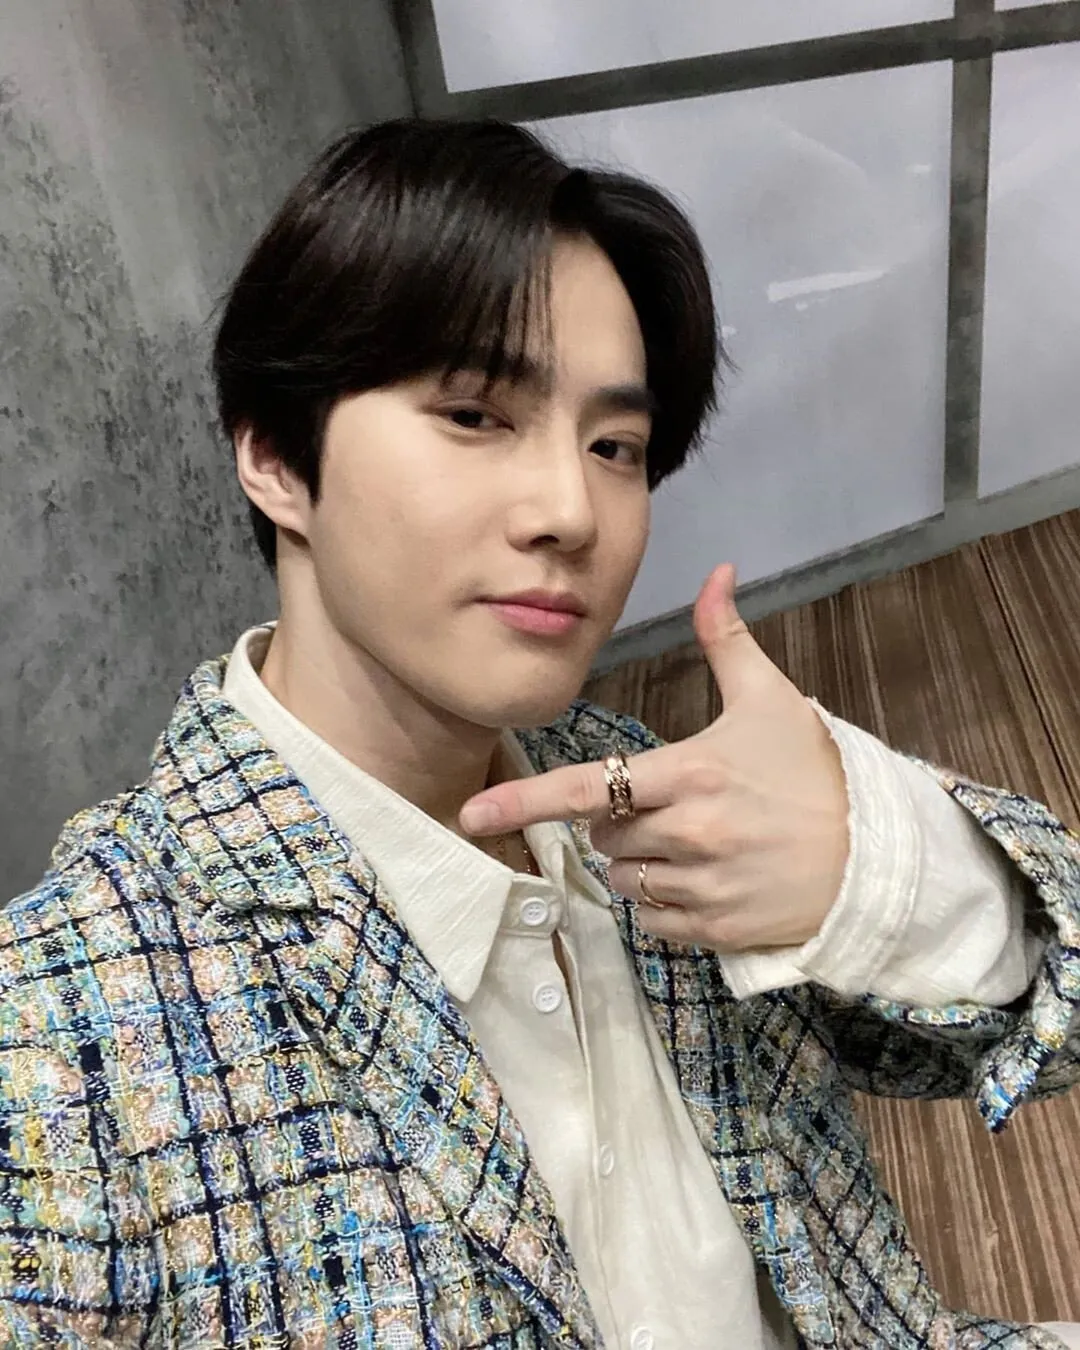 Goodbye, Suho – the K-pop star leaving his Exo bandmates to enter Korean  military service, after releasing first solo album Self-Portrait | South  China Morning Post